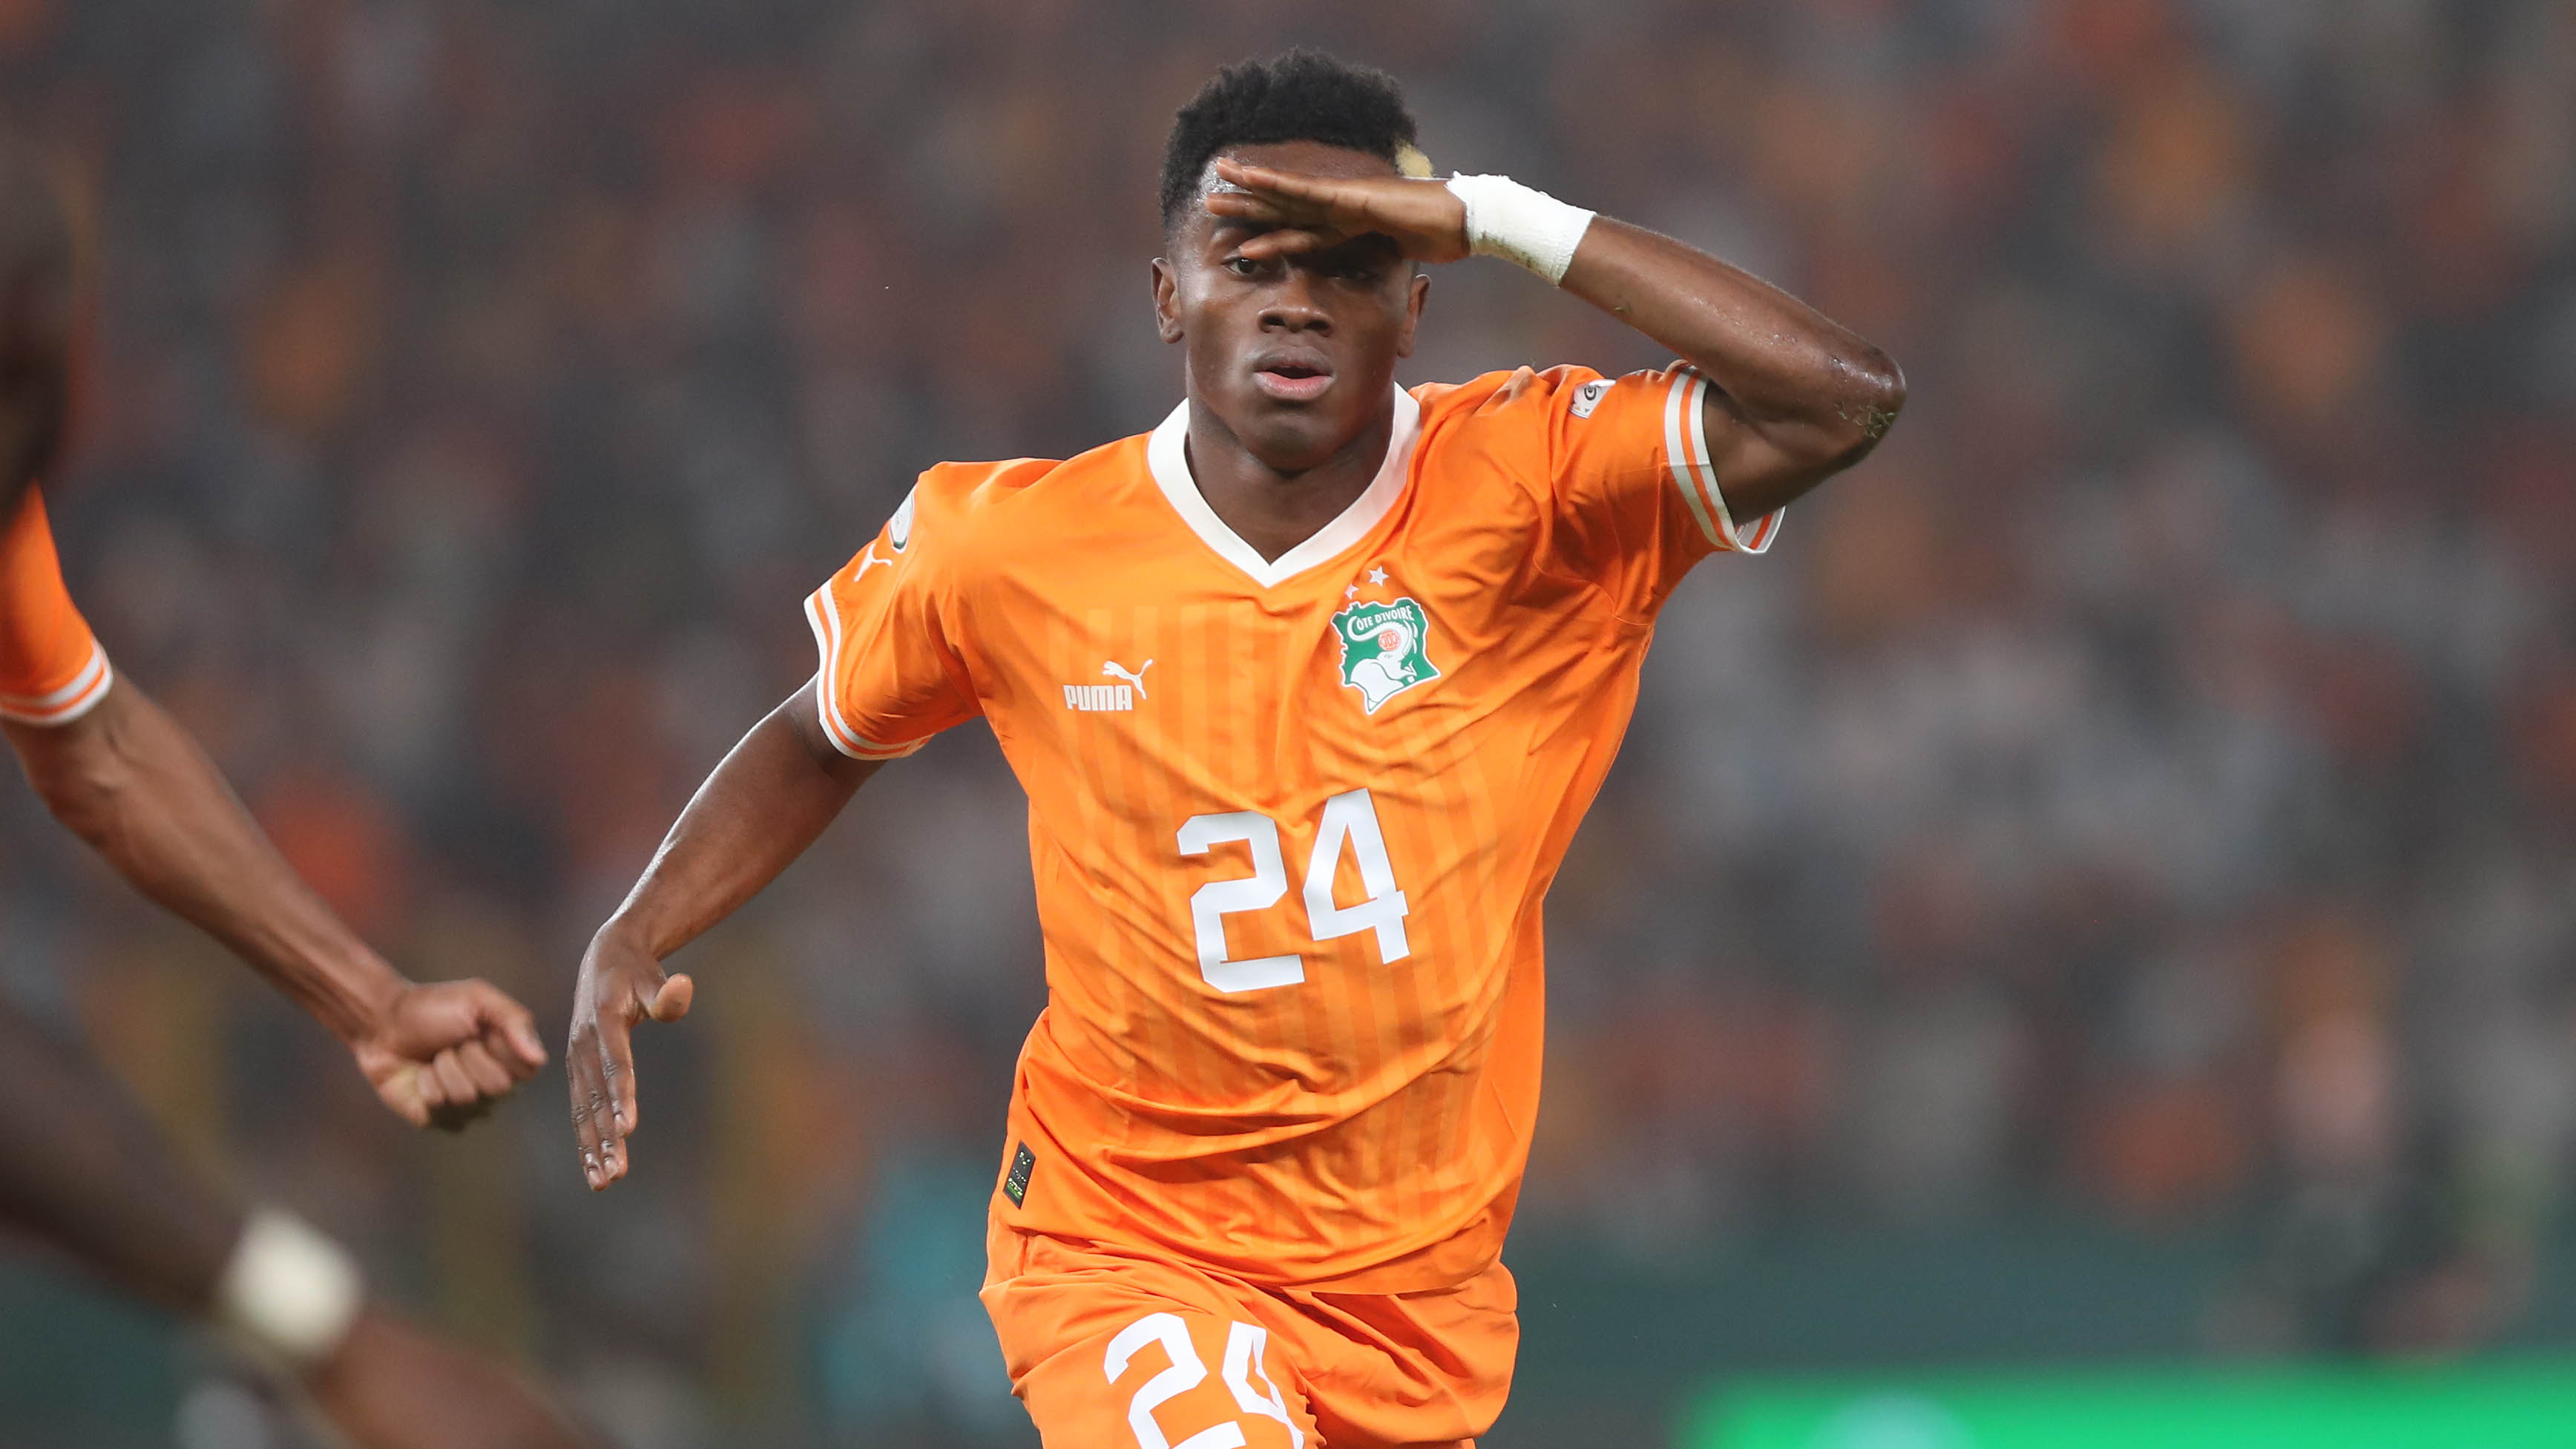 AFCON 2023: Ivory Coast triumphs in thrilling quarterfinal clash with Mali